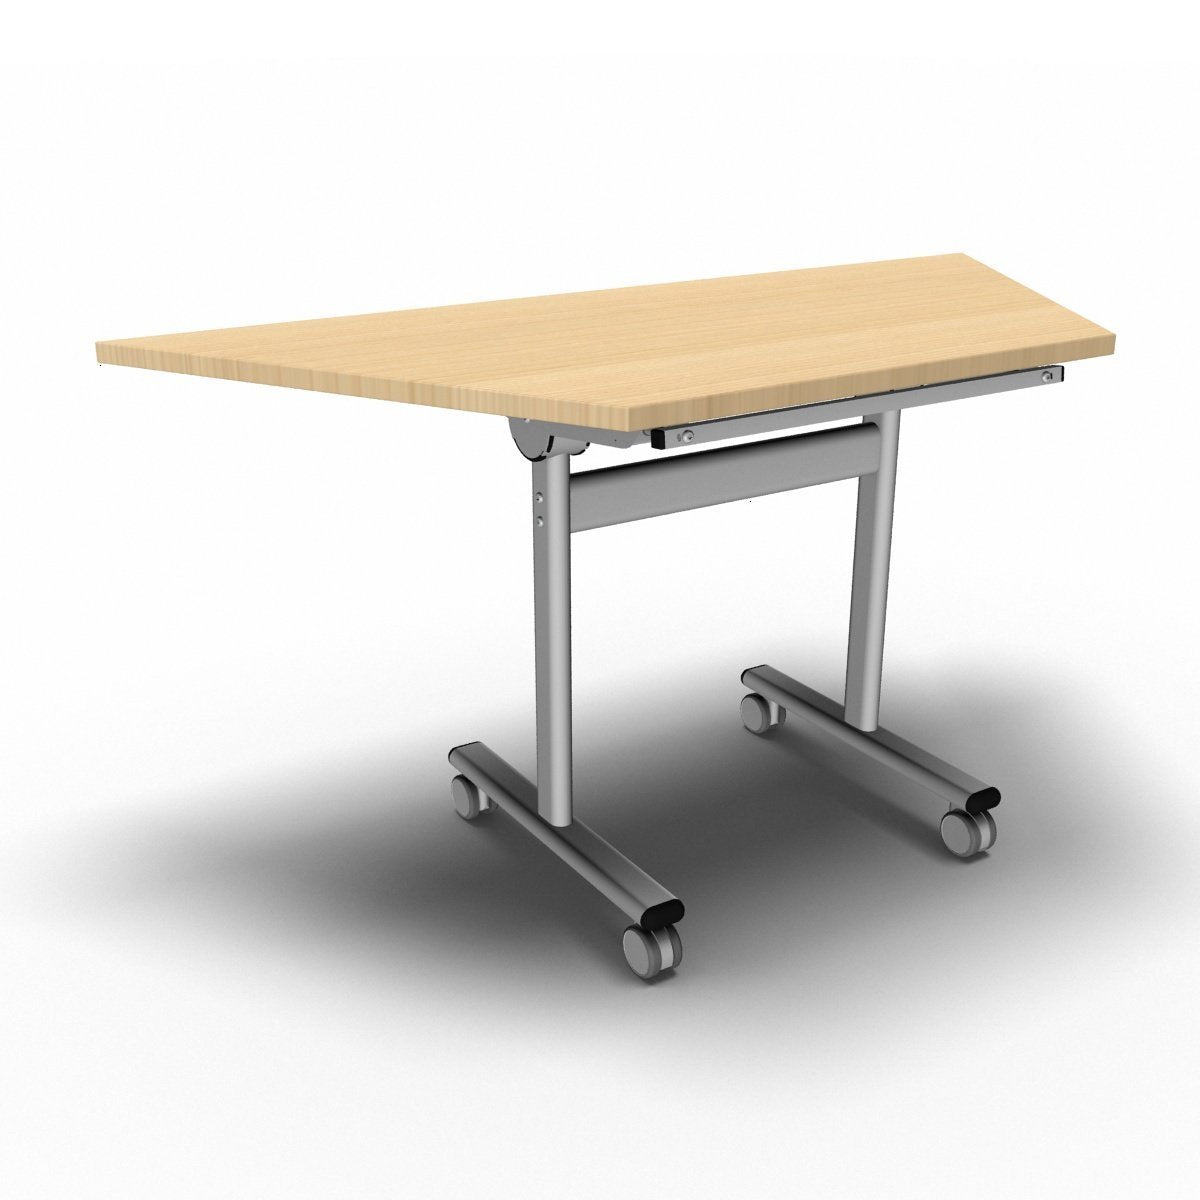 Table 1400 x 700 x 720mm / Trapezoidal / Maple Synergy Flip Top Tables